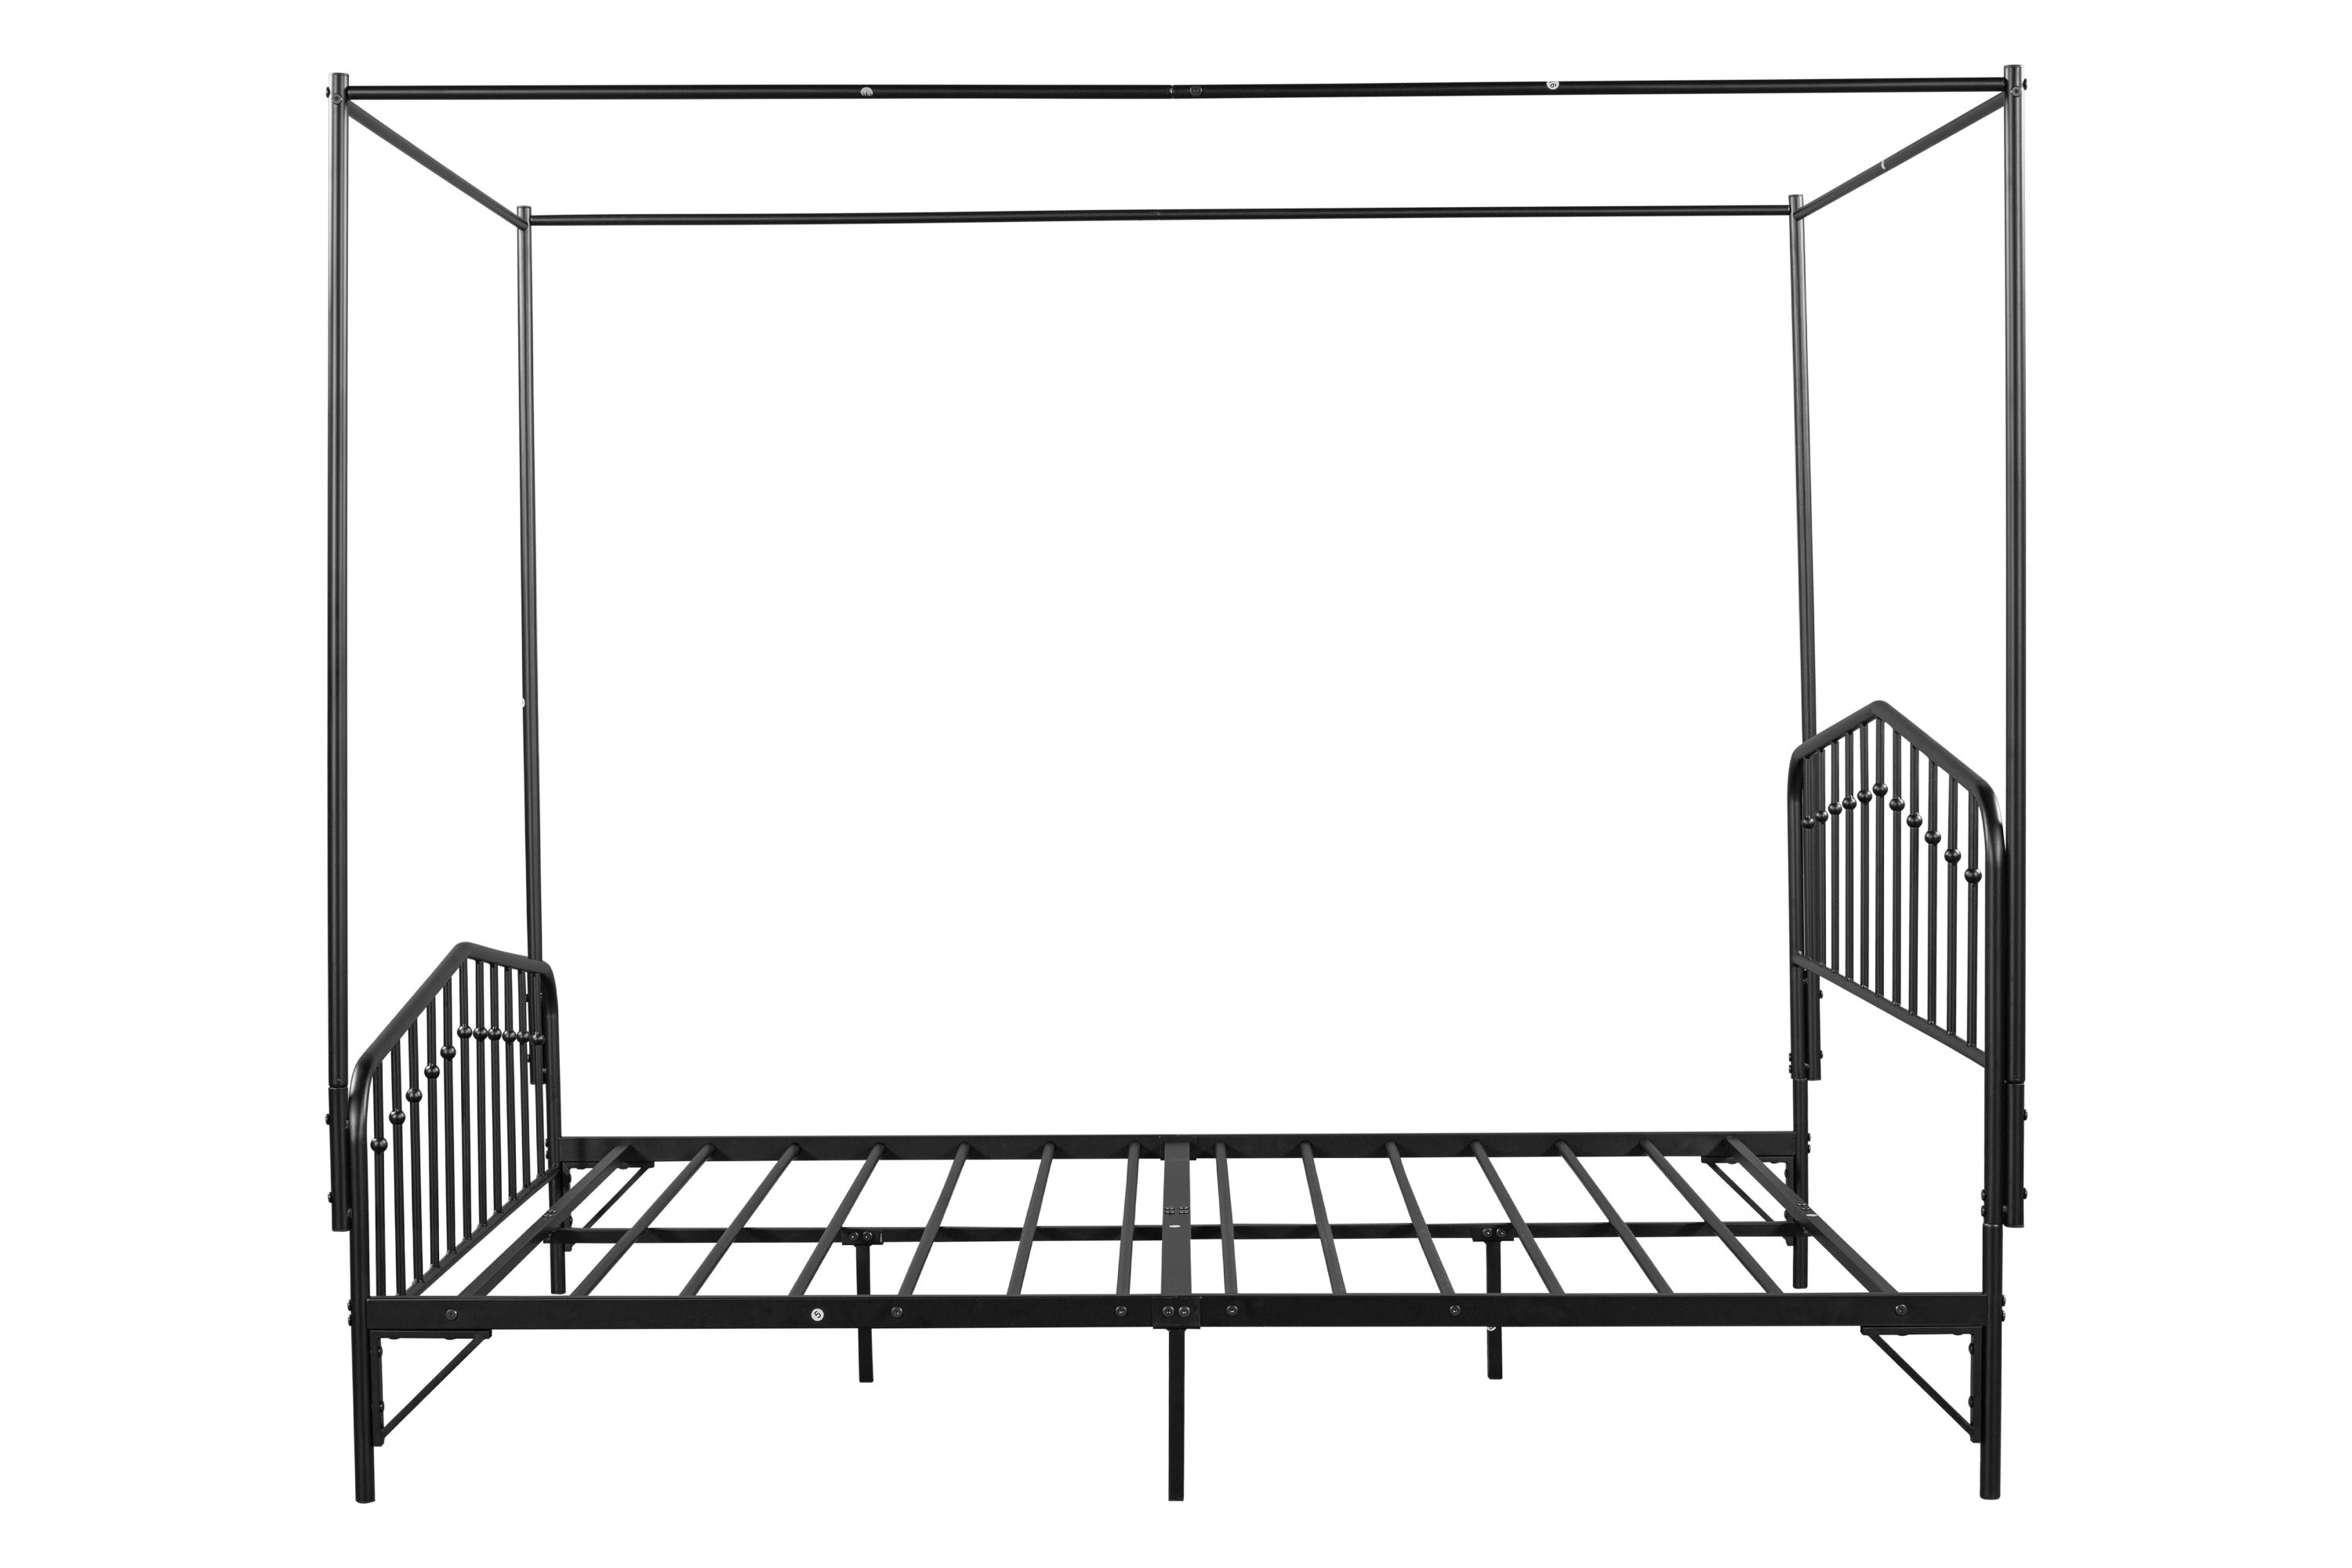 ZNTS Detachable Queen Anti-Noise Metal Canopy Bed W42751566